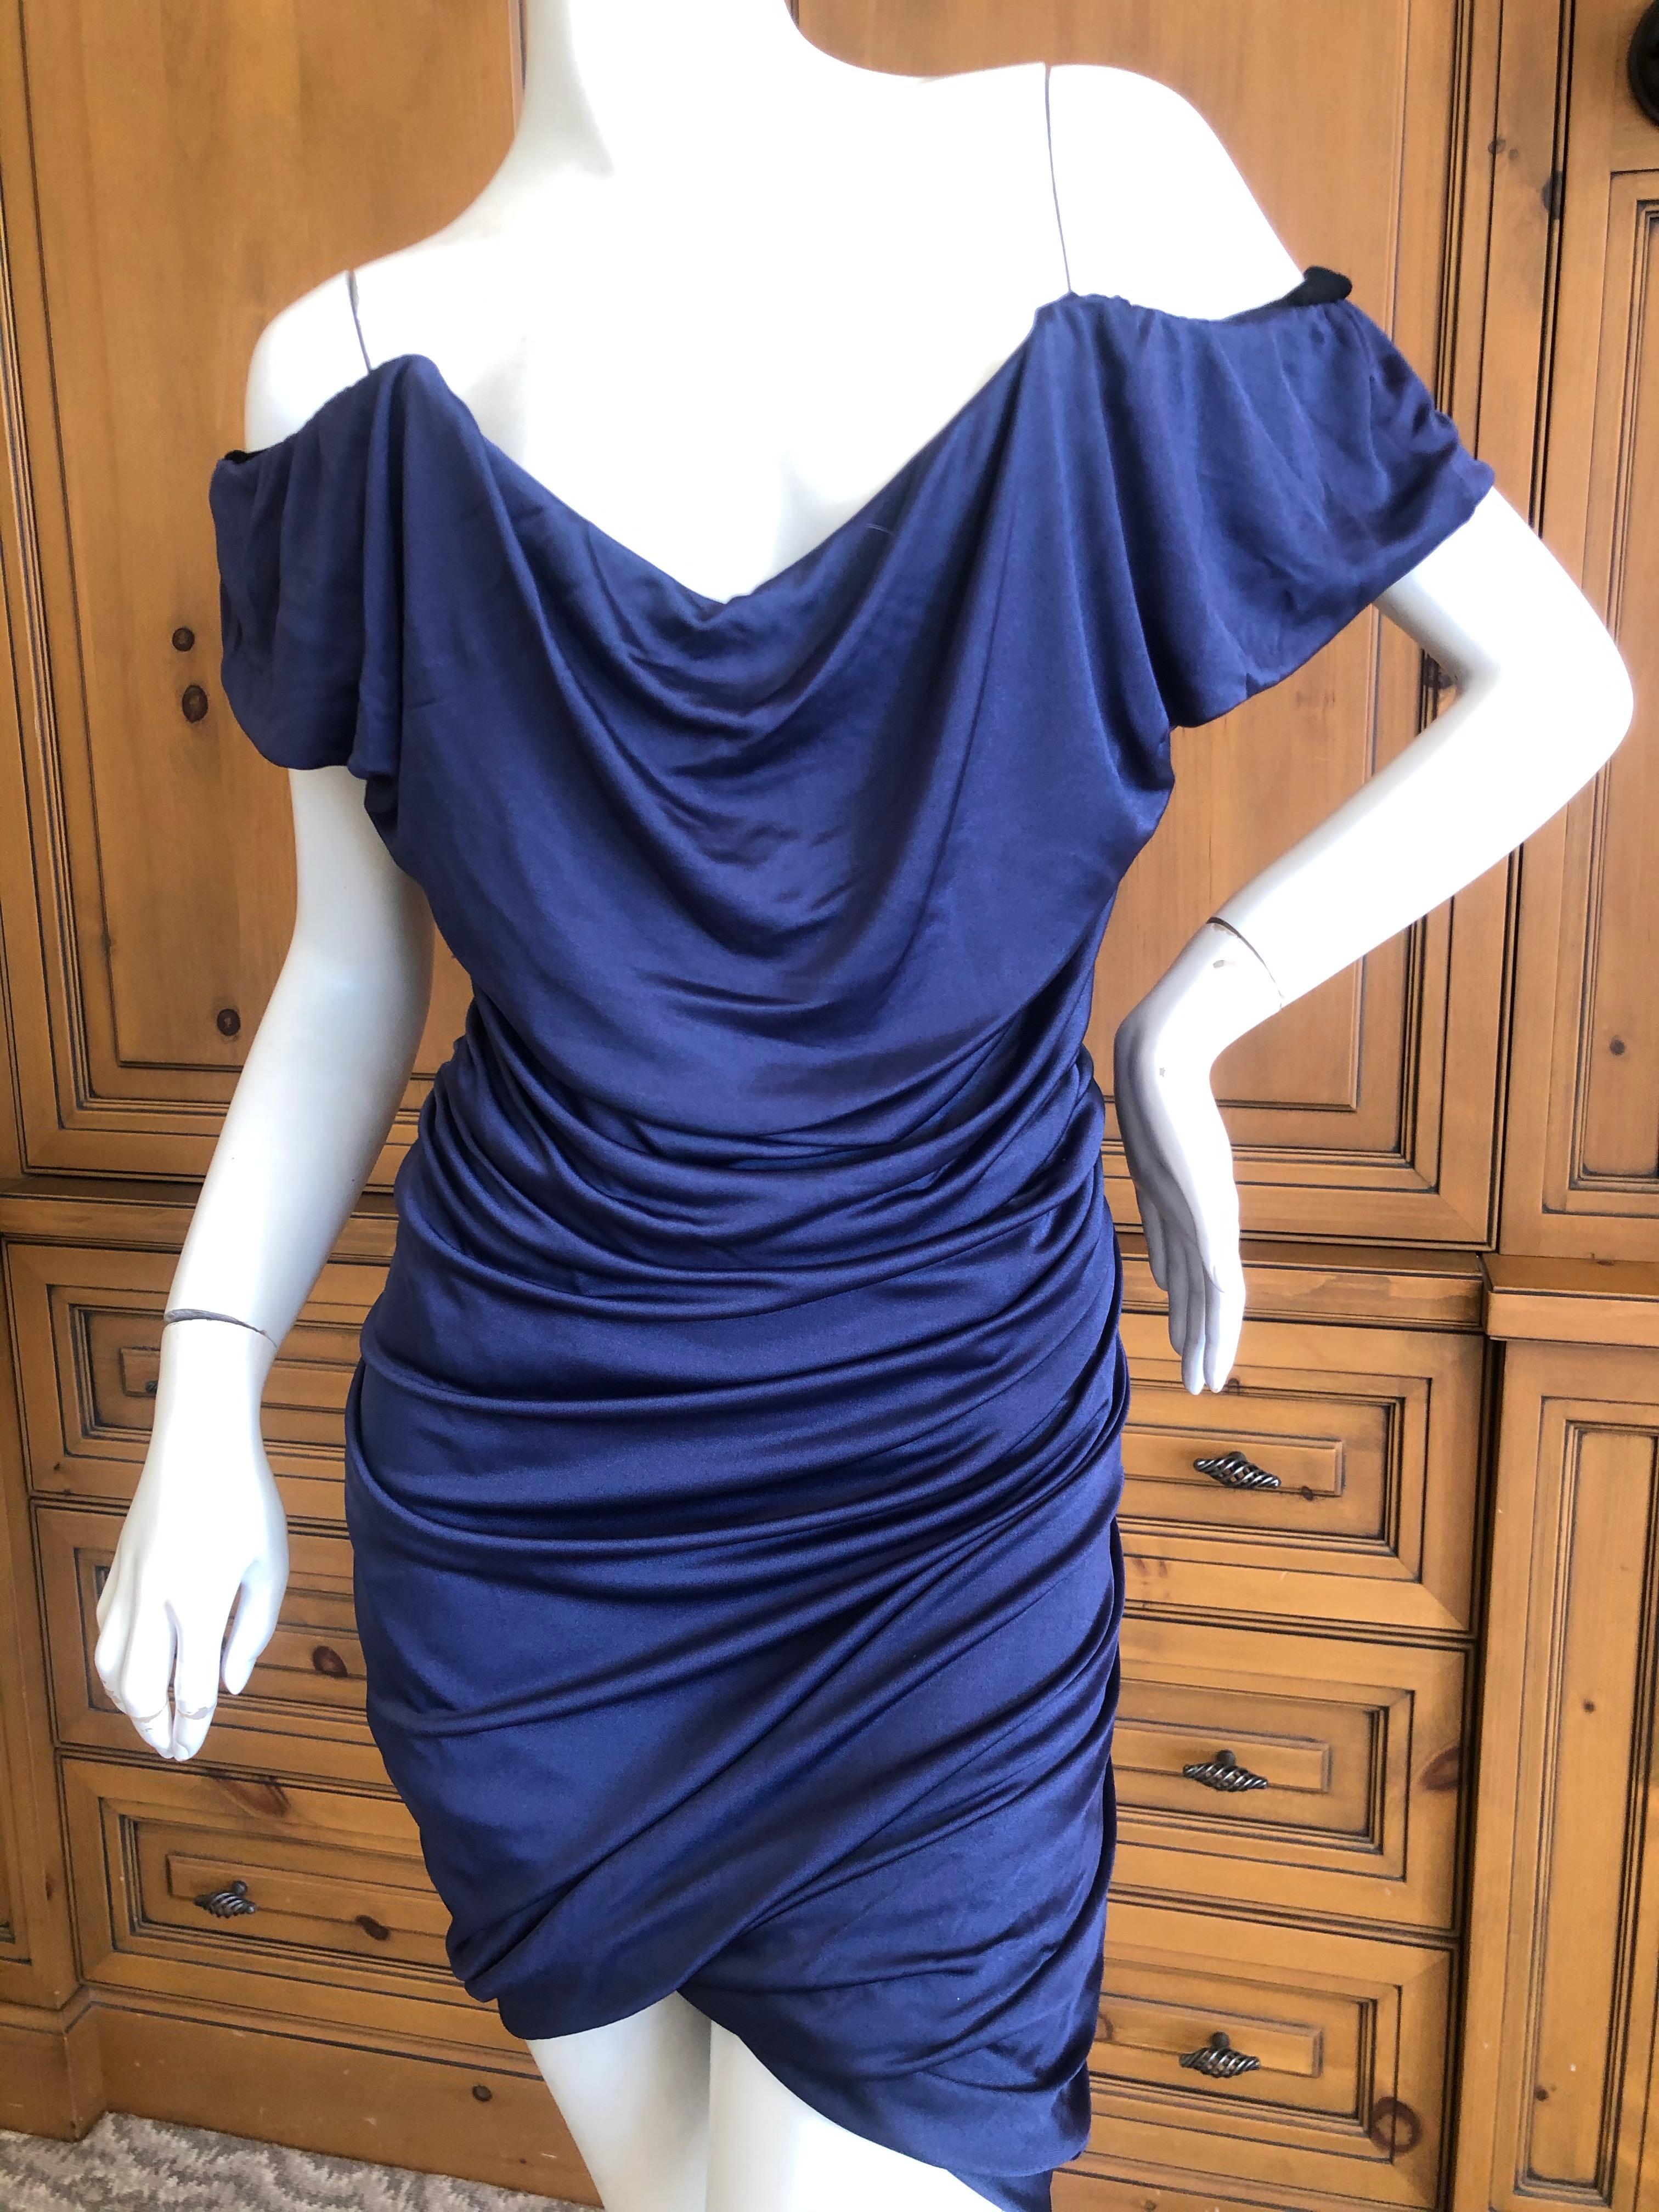 Vivienne Westwood Elegant Dark Blue Cocktail Dress with Built In Corset Sz XL In Excellent Condition For Sale In Cloverdale, CA